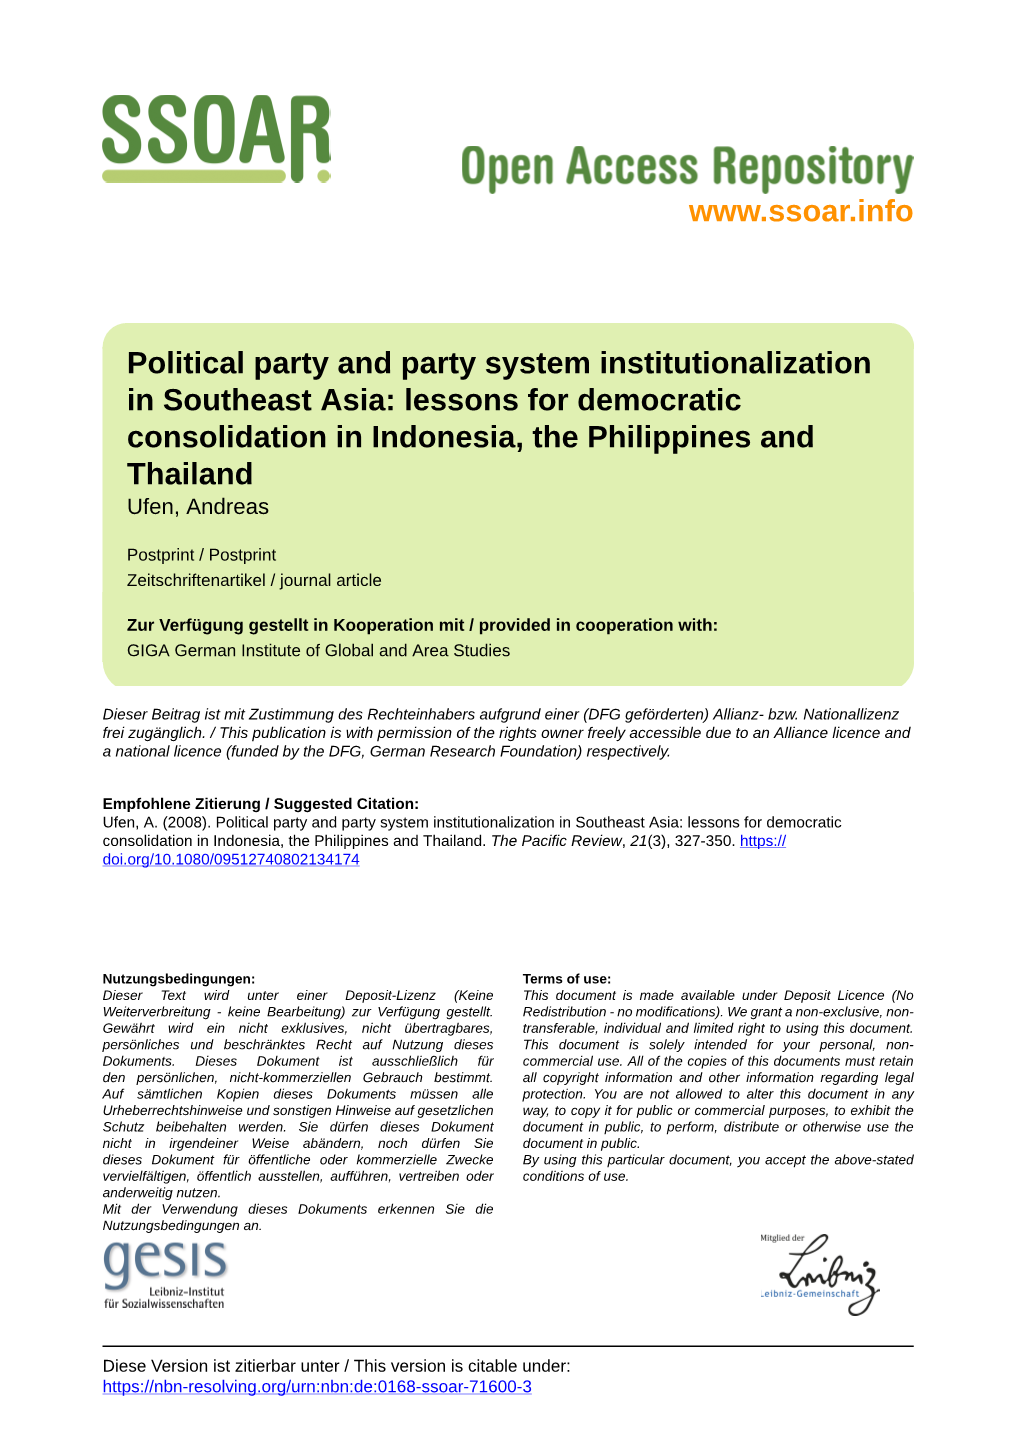 Political Party and Party System Institutionalization in Southeast Asia: Lessons for Democratic Consolidation in Indonesia, the Philippines and Thailand Ufen, Andreas